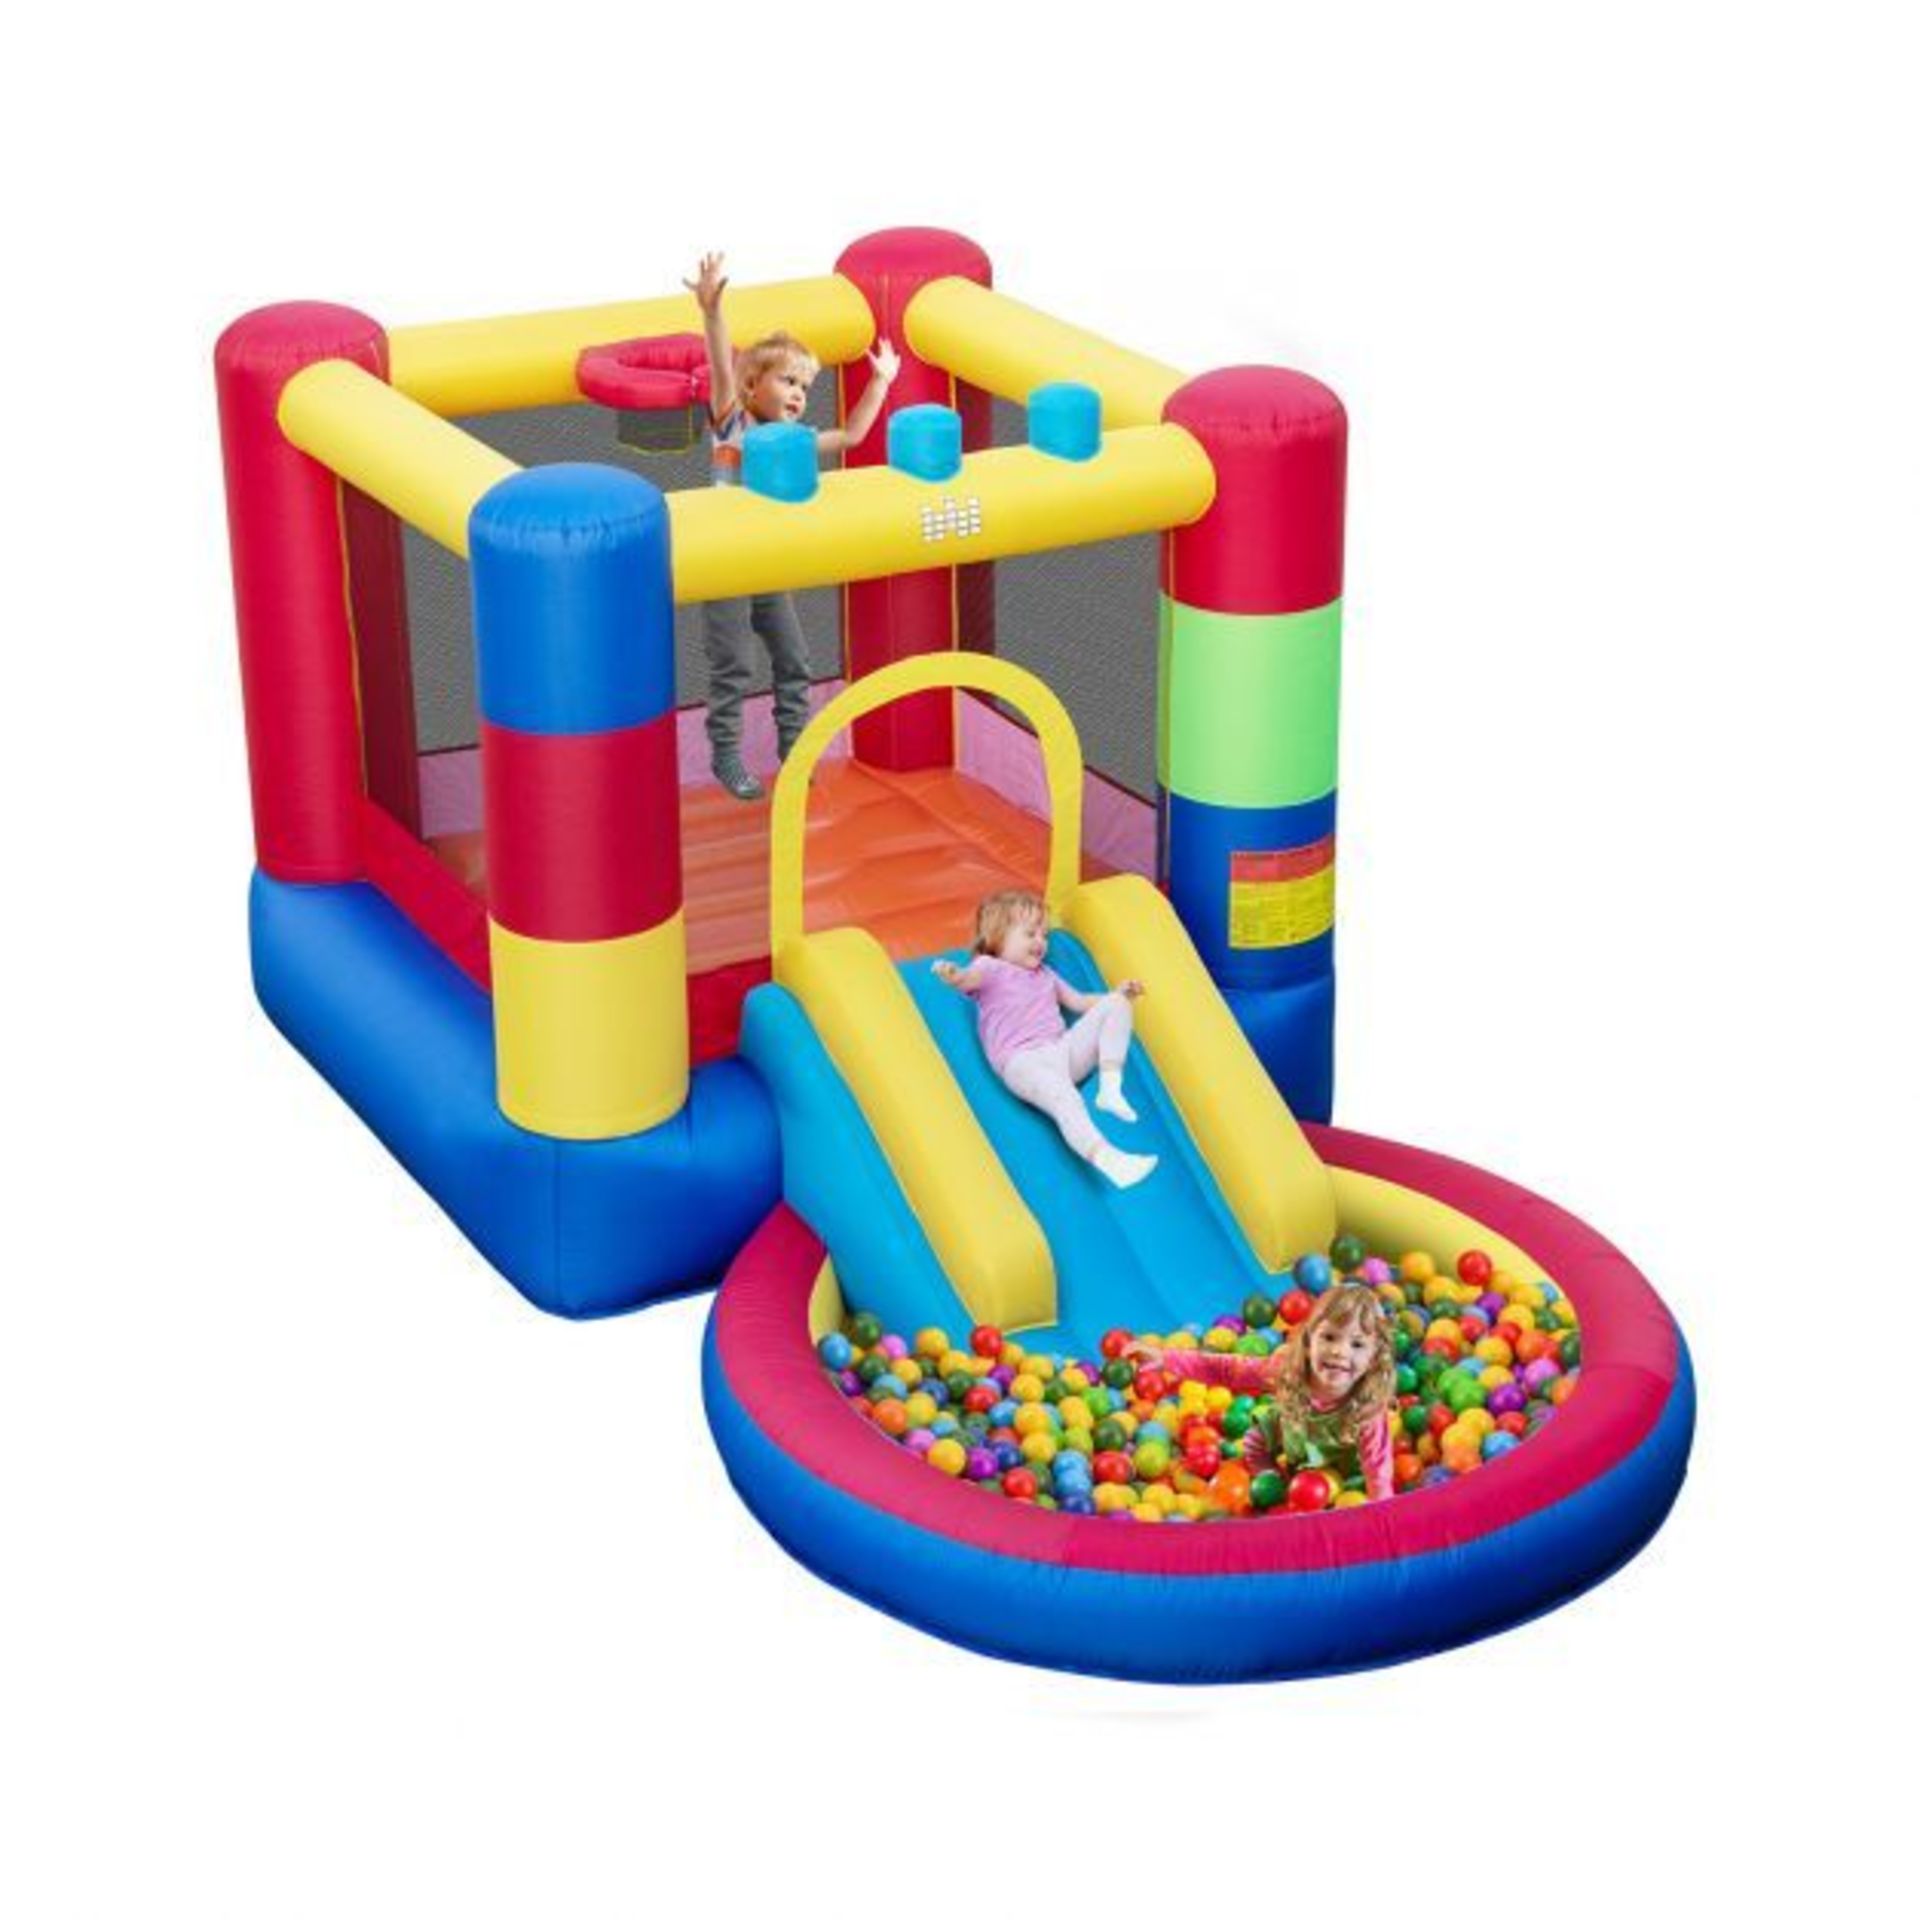 Inflatable Kids Bounce Castle with Slide and 50 Ocean Balls. - ER26. Compared with traditional